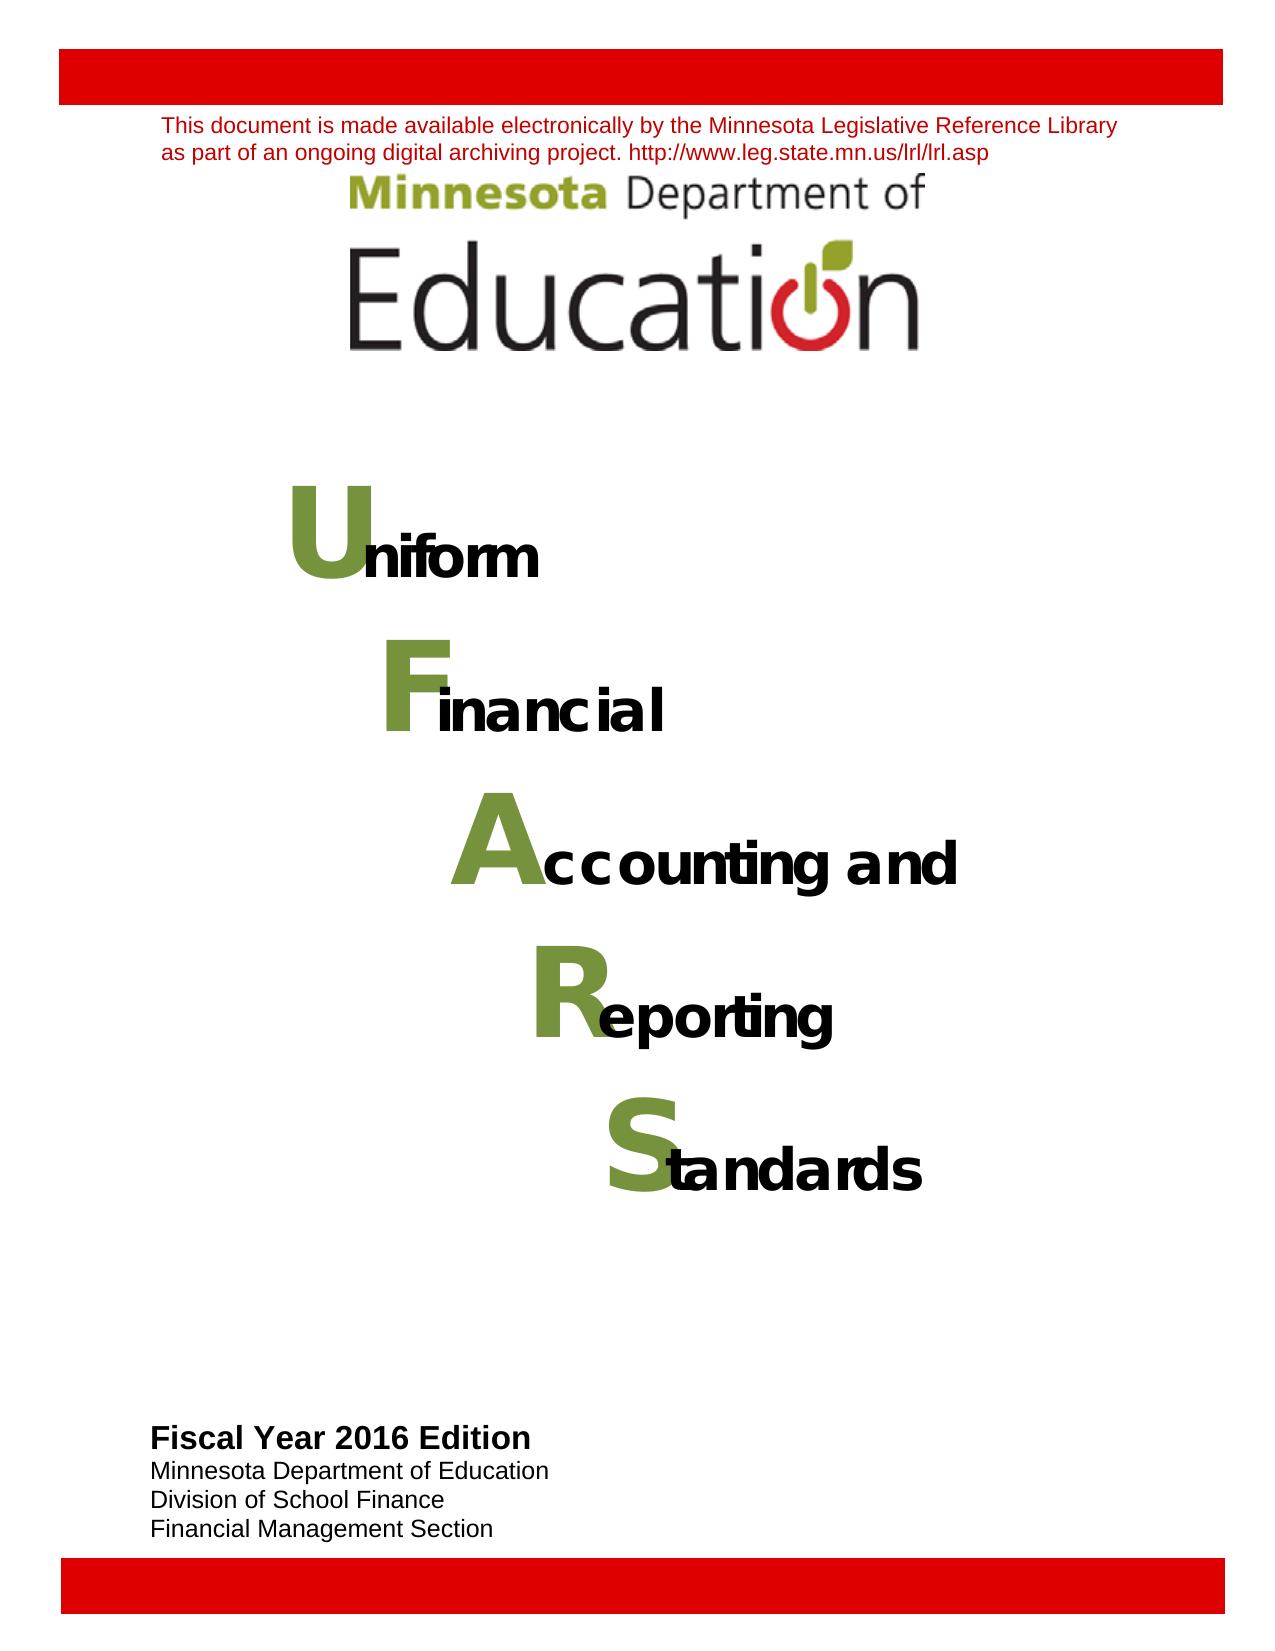 Uniformed Financial Accounting and Reporting Standards 2016